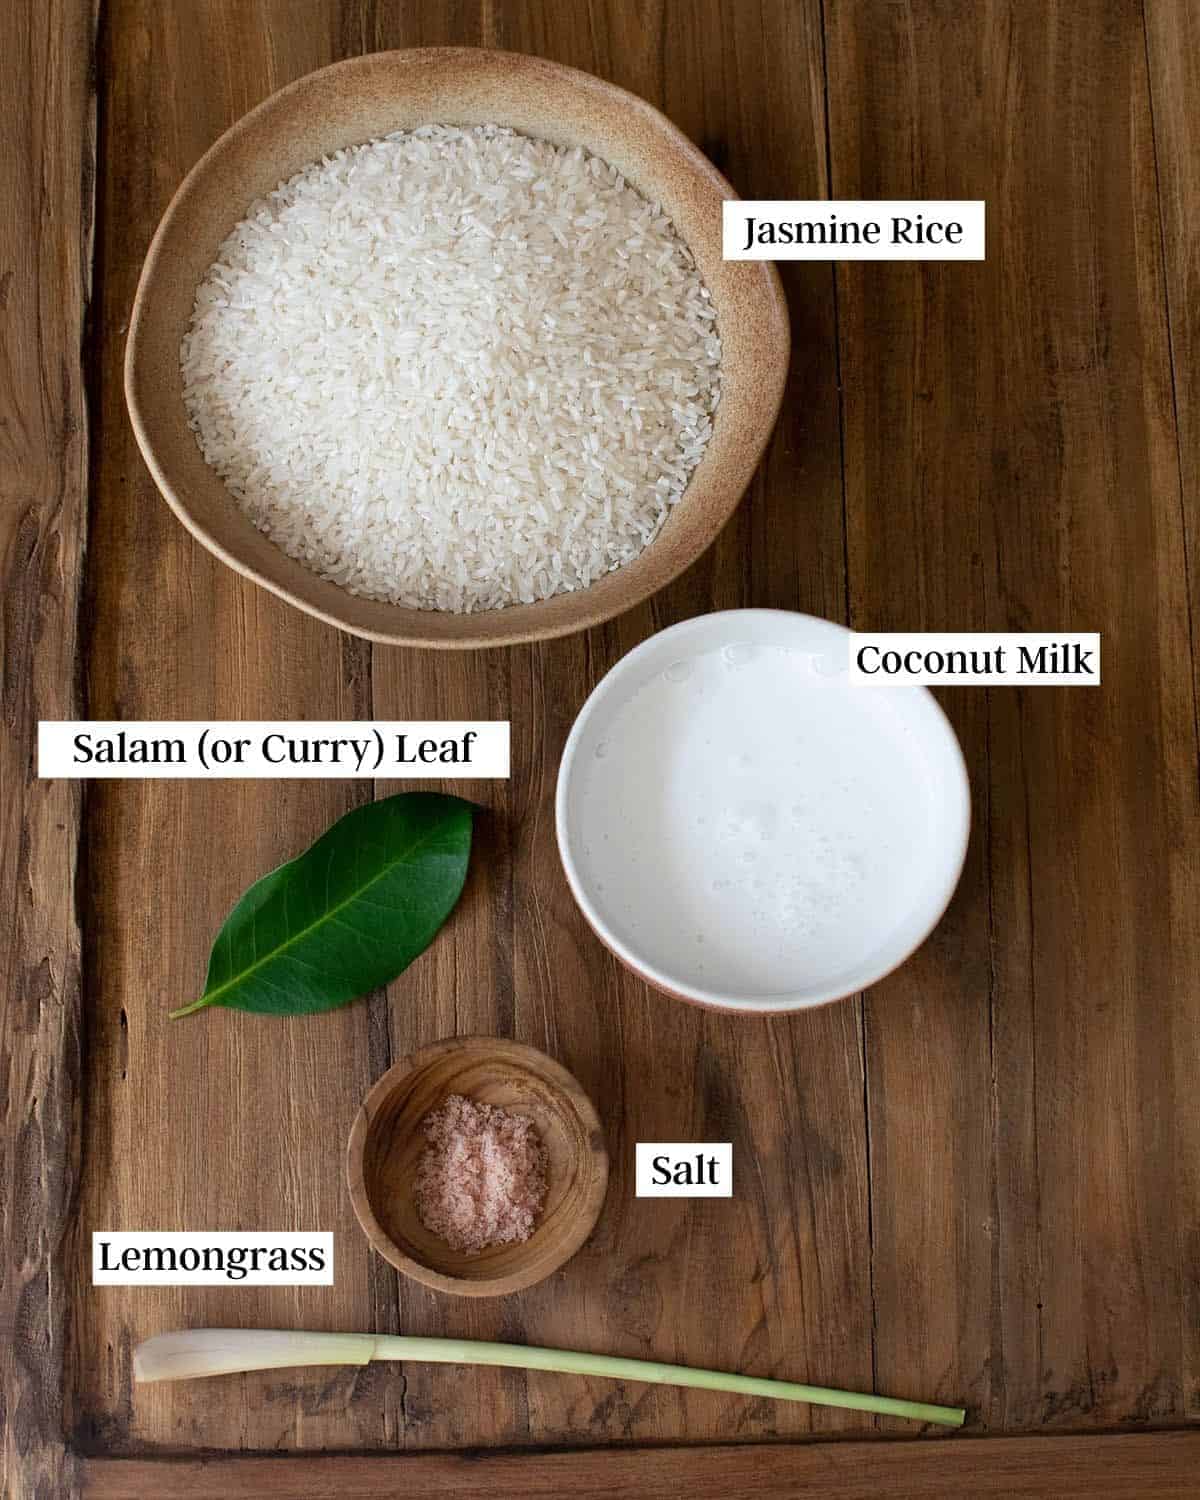 Ingredients for this recipe showing rice, coconut milk, a salam leaf, salt and lemongrass